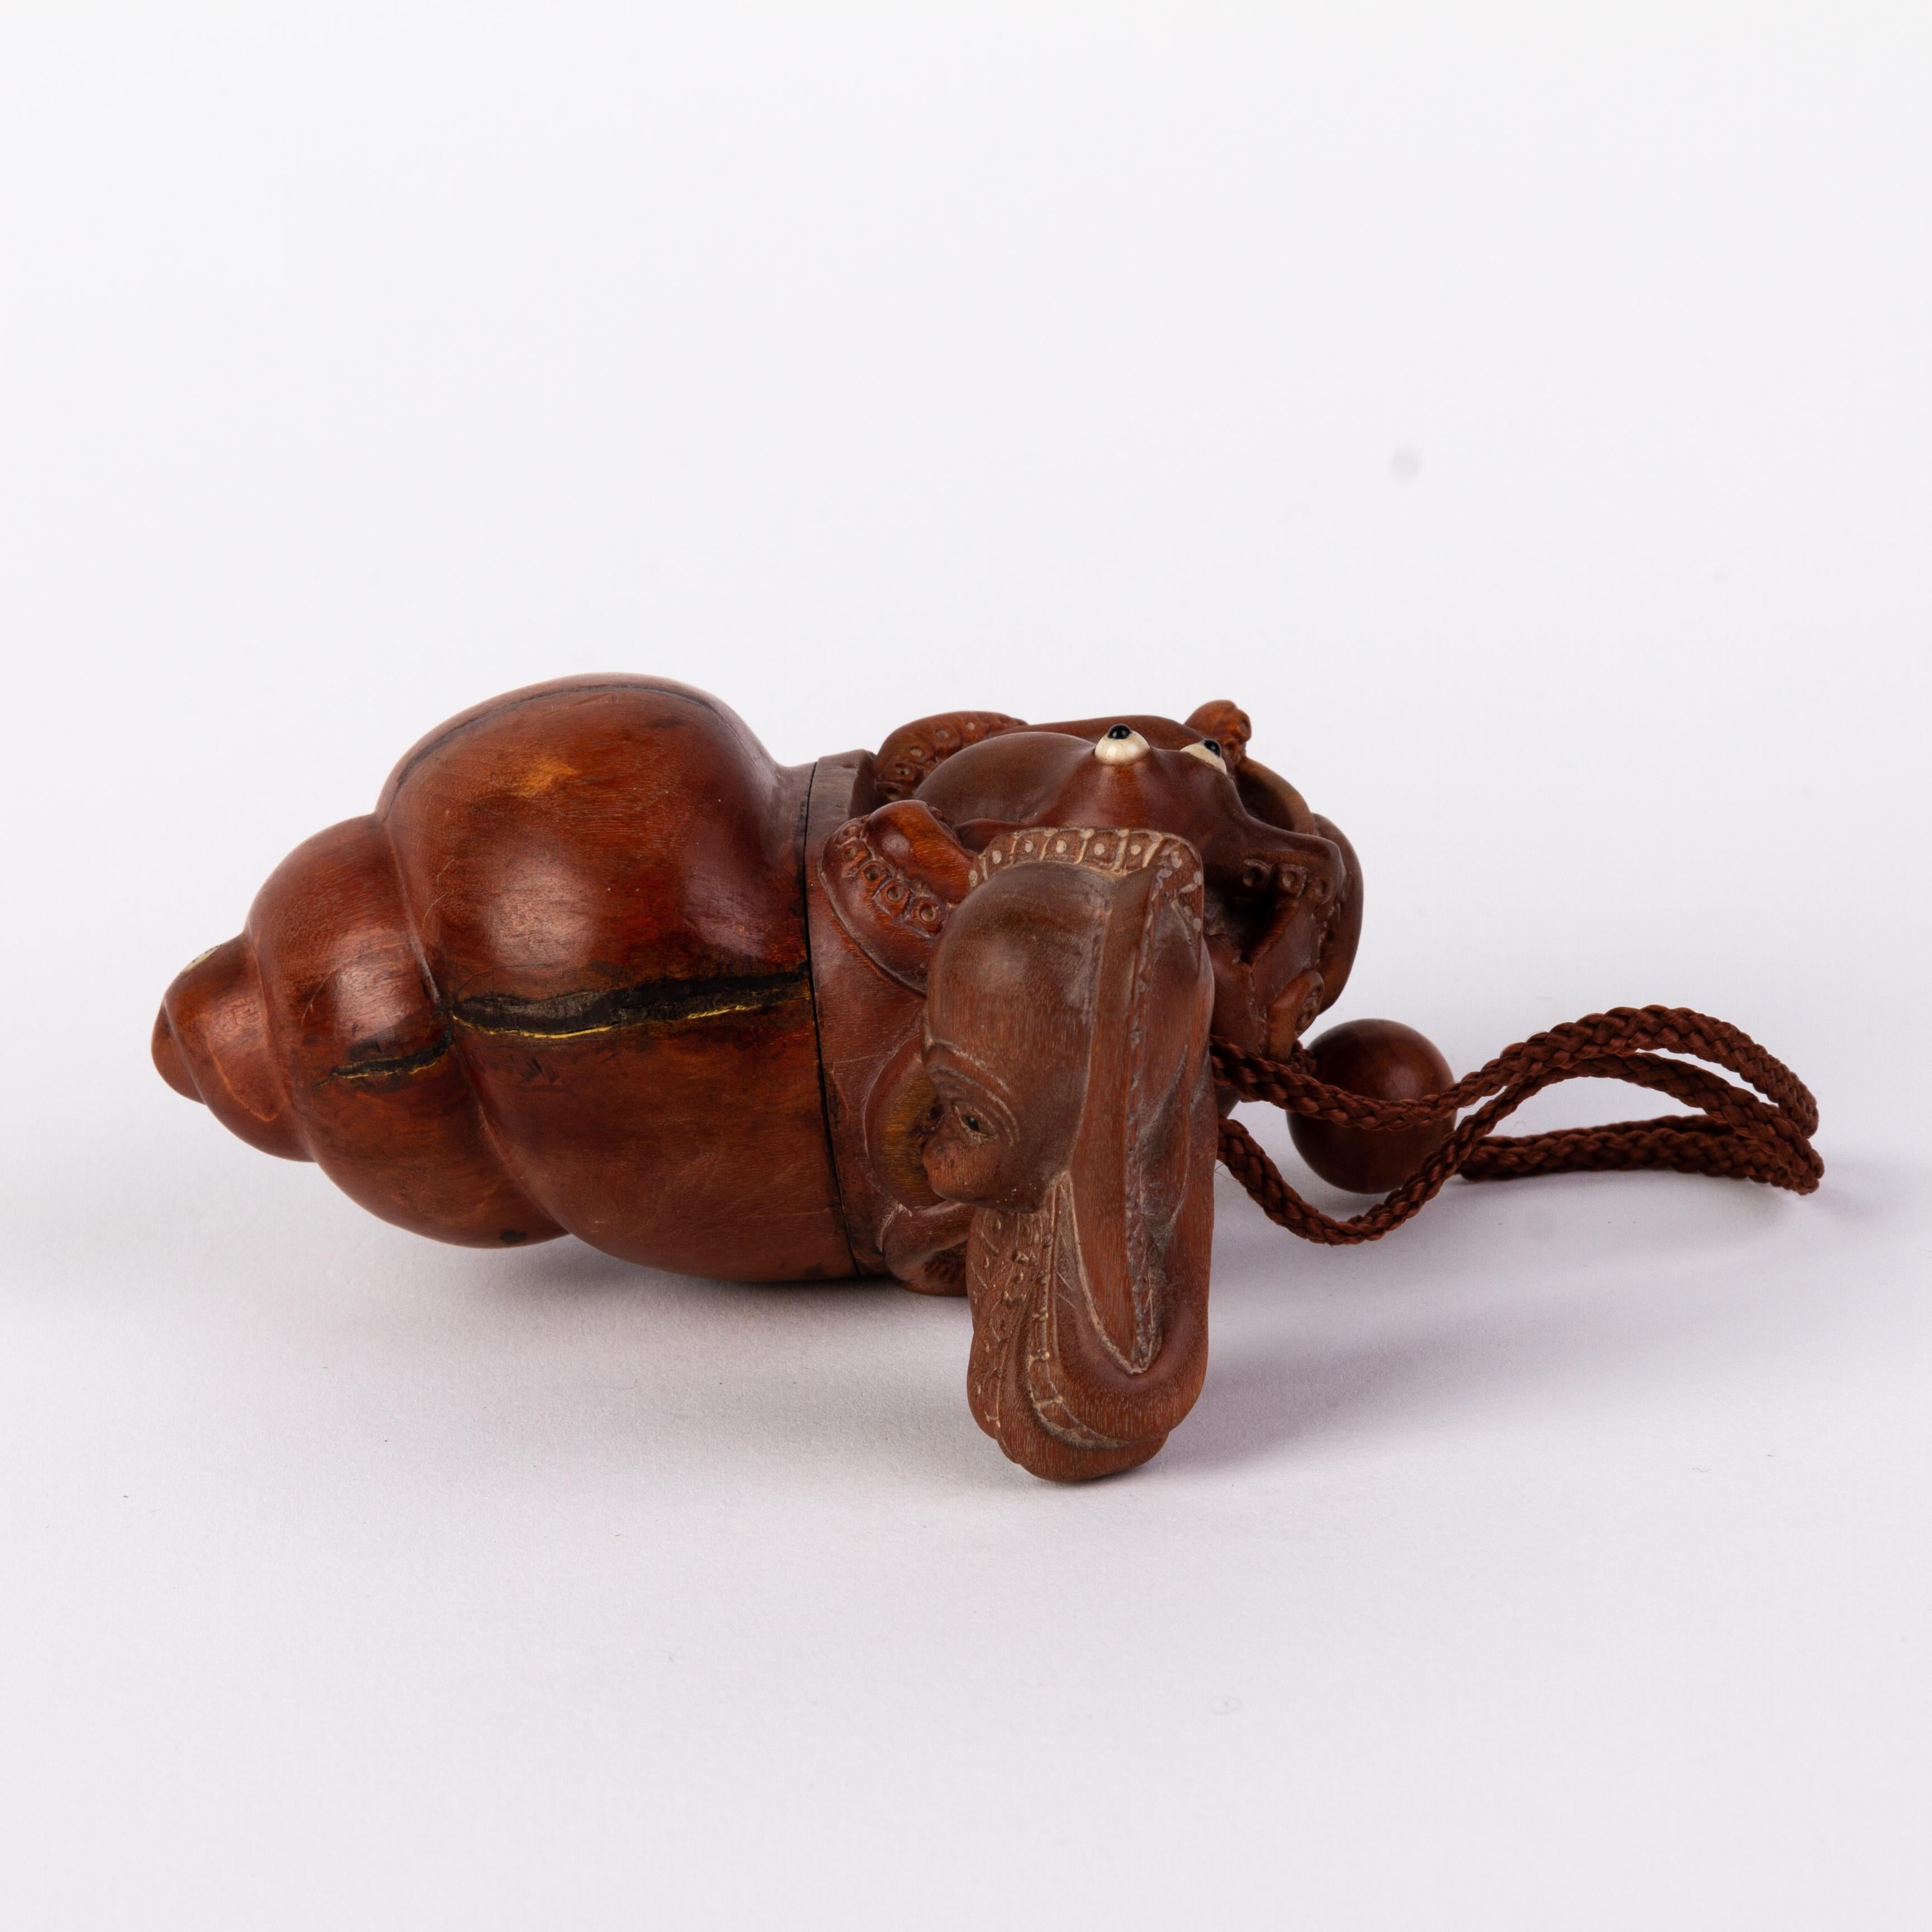 Signed Japanese Carved Wood Octopus Inro Ojime Netsuke For Sale 2